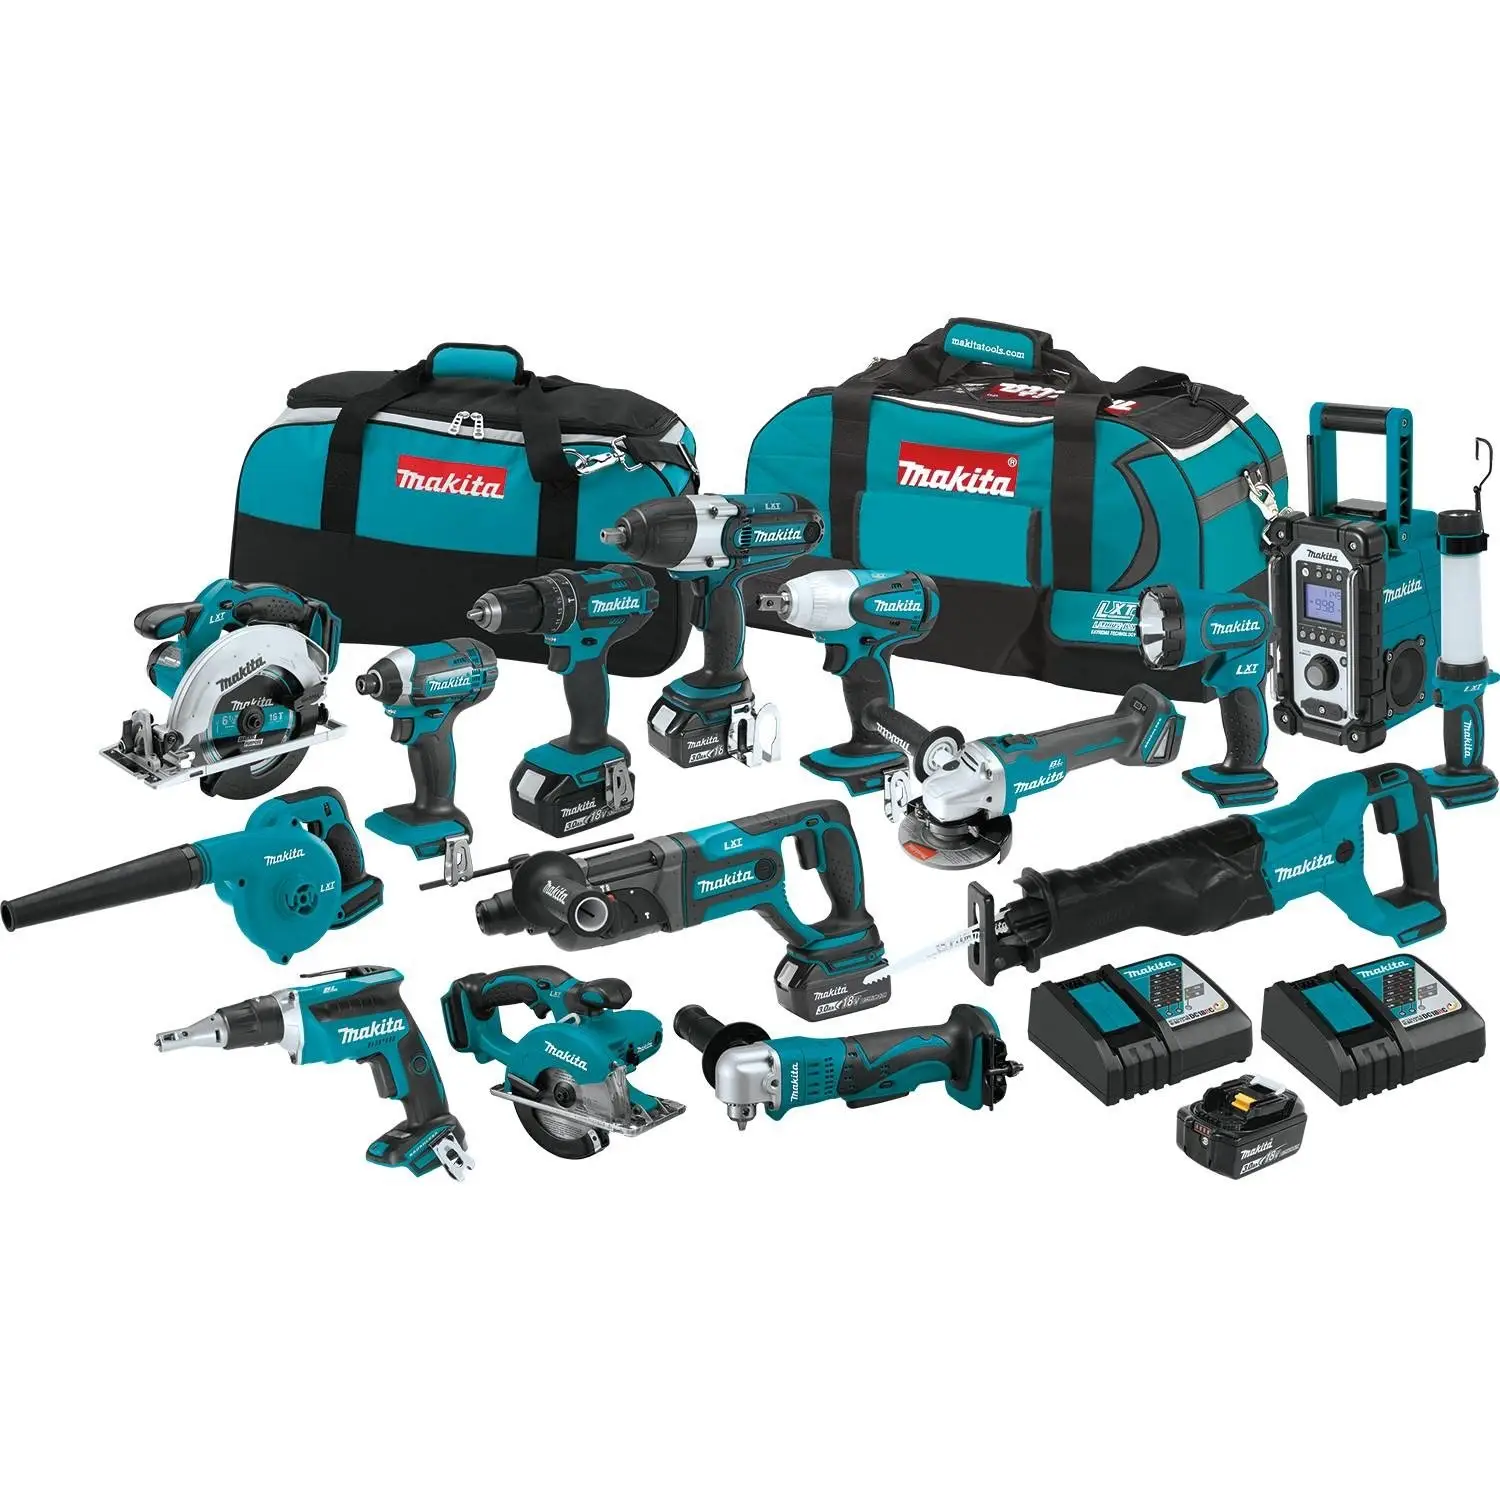 Factory price - Makitas XT1501 18V LXT Lithium-Ion Cordless 15-Pc. Combo FREE DELIVERY